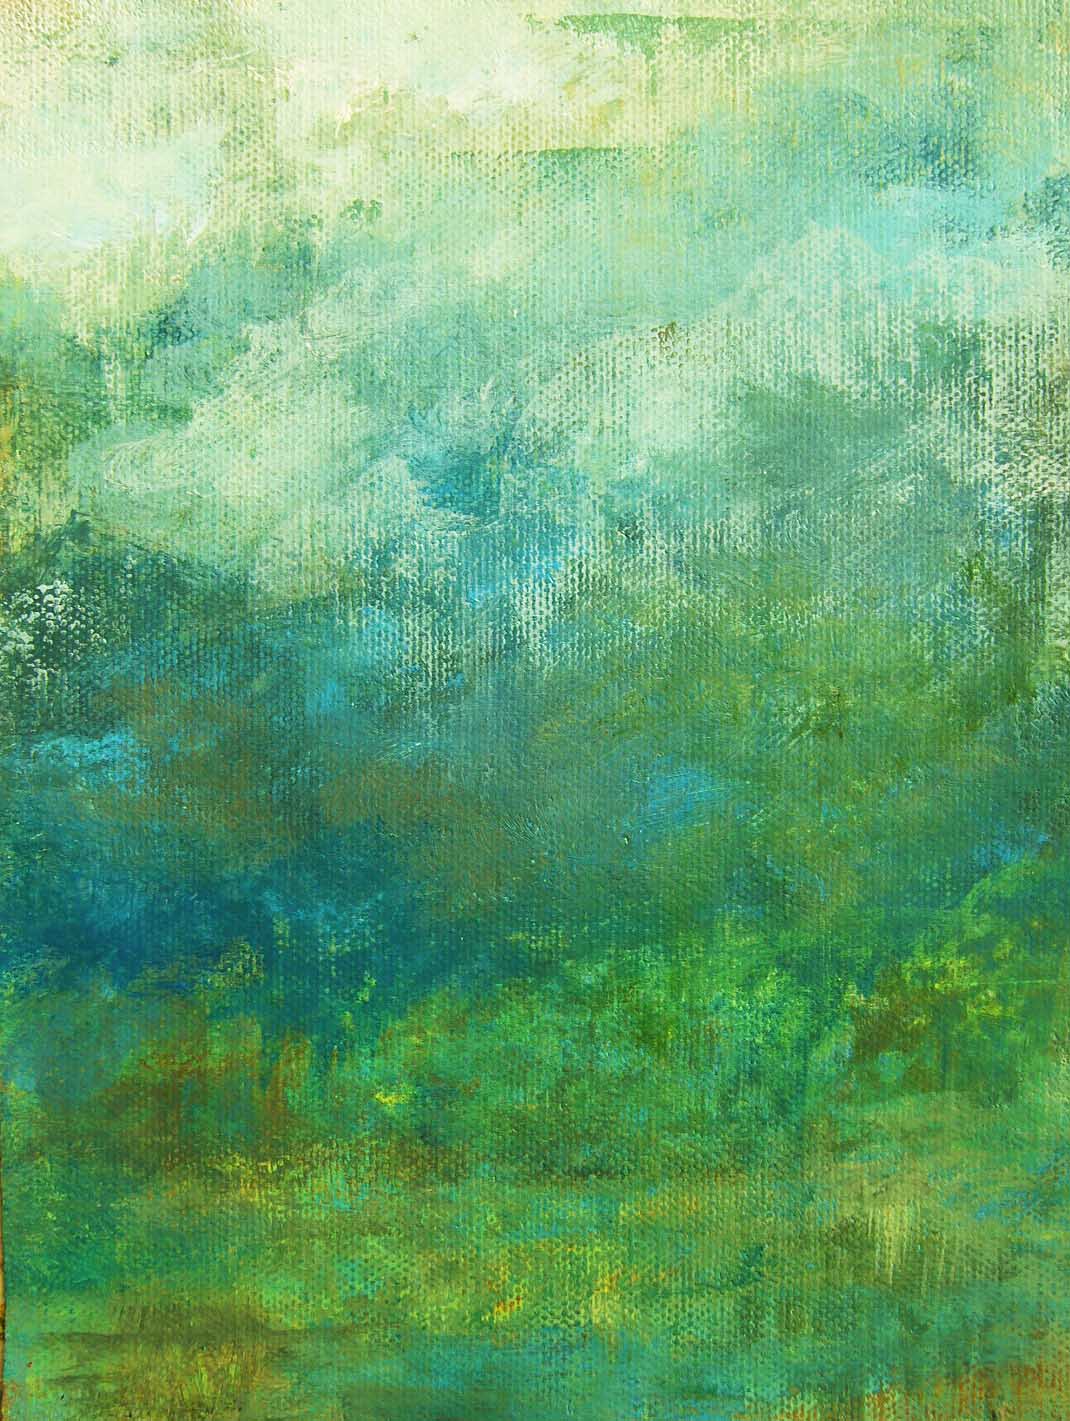 art every day number 567 acrylic painting east meadow landscape blue green